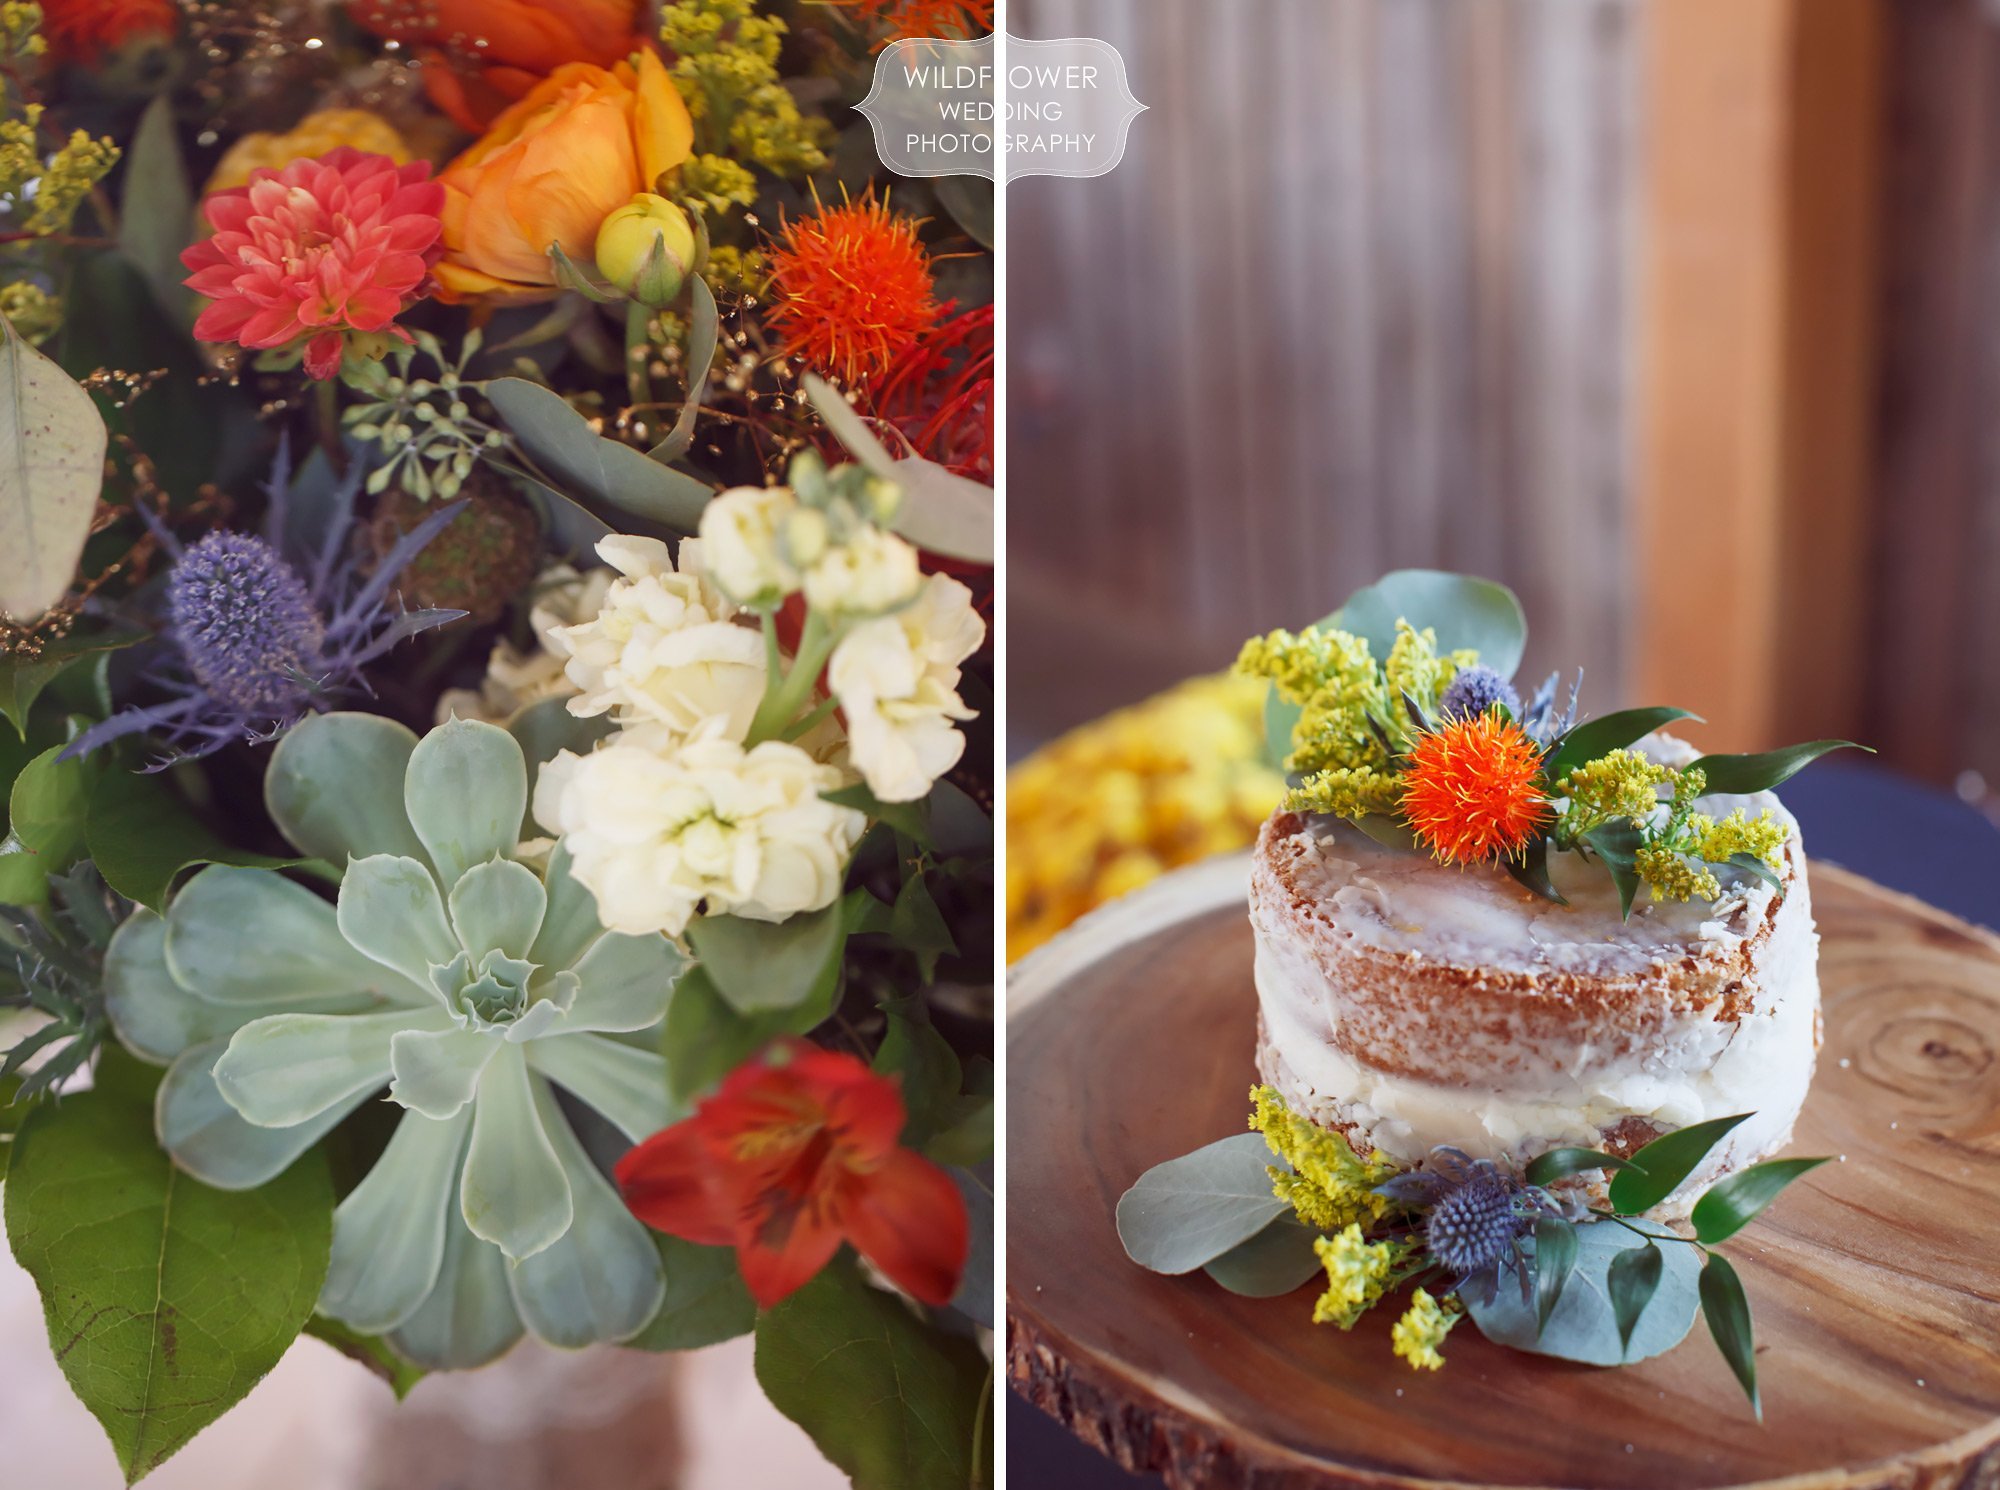 Succulent wedding flowers with colorful autumn hues for this Schwinn Produce Farm wedding, along with a small naked cake.